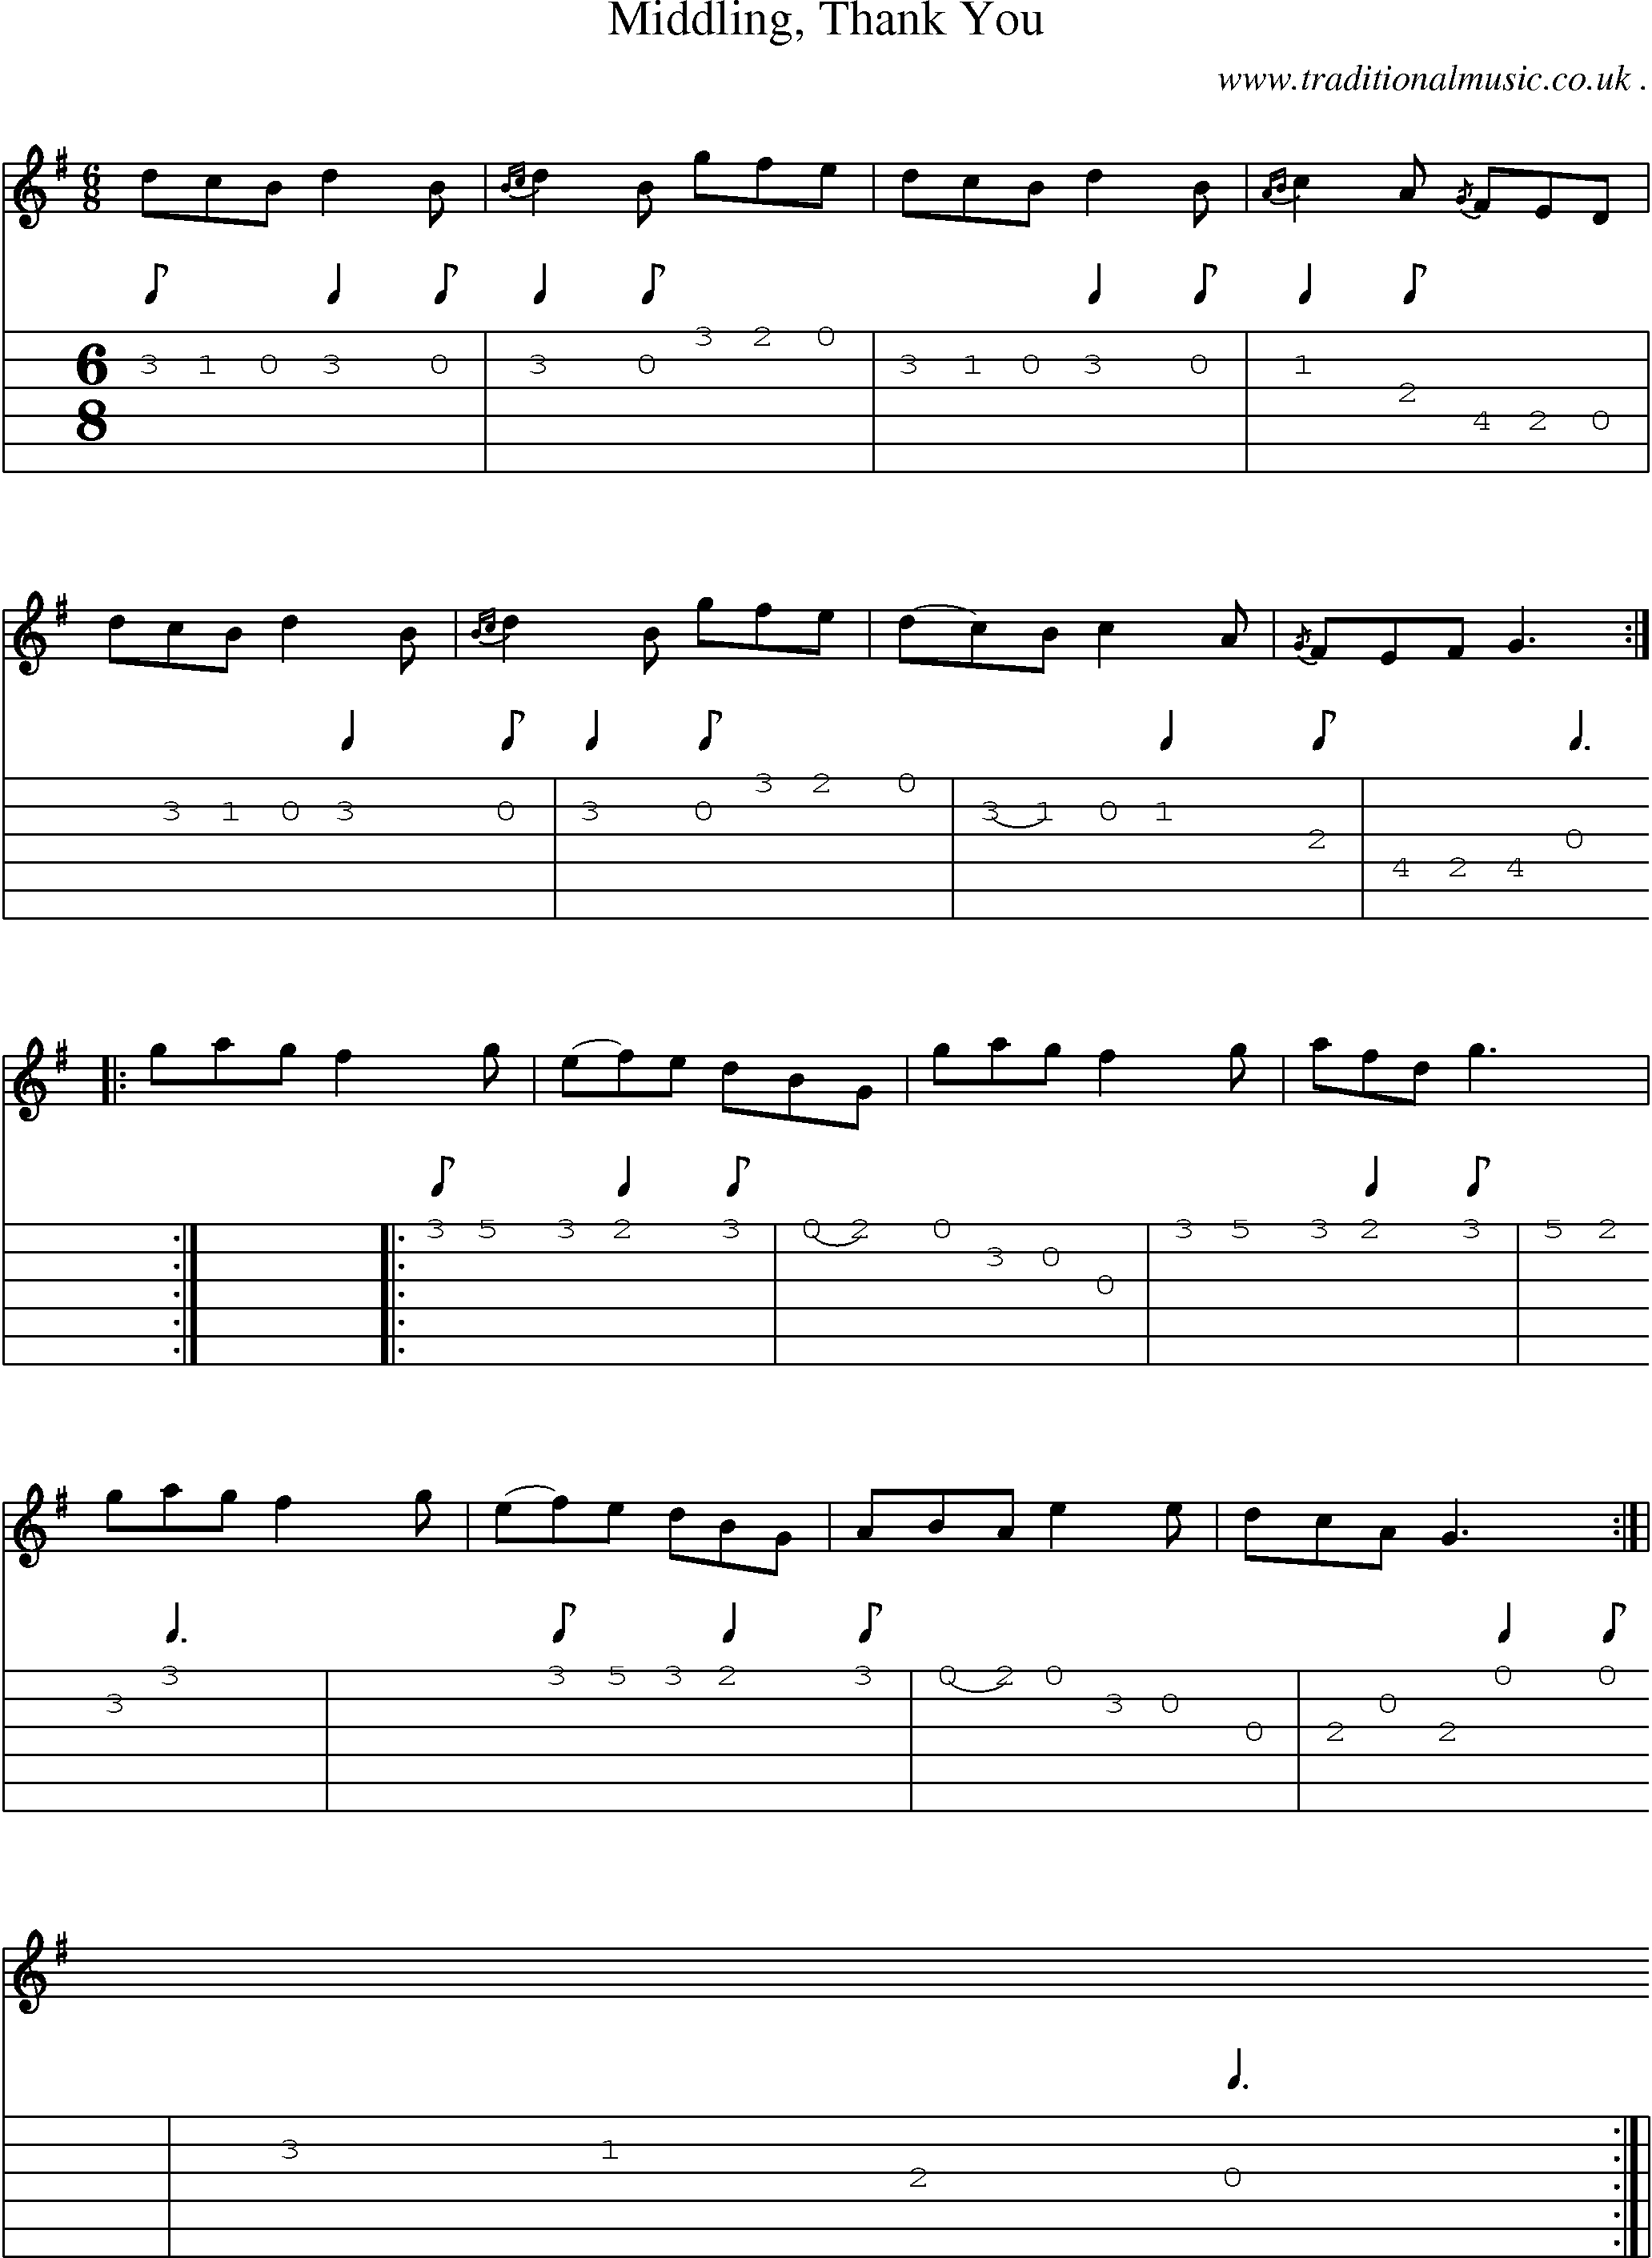 Sheet-music  score, Chords and Guitar Tabs for Middling Thank You